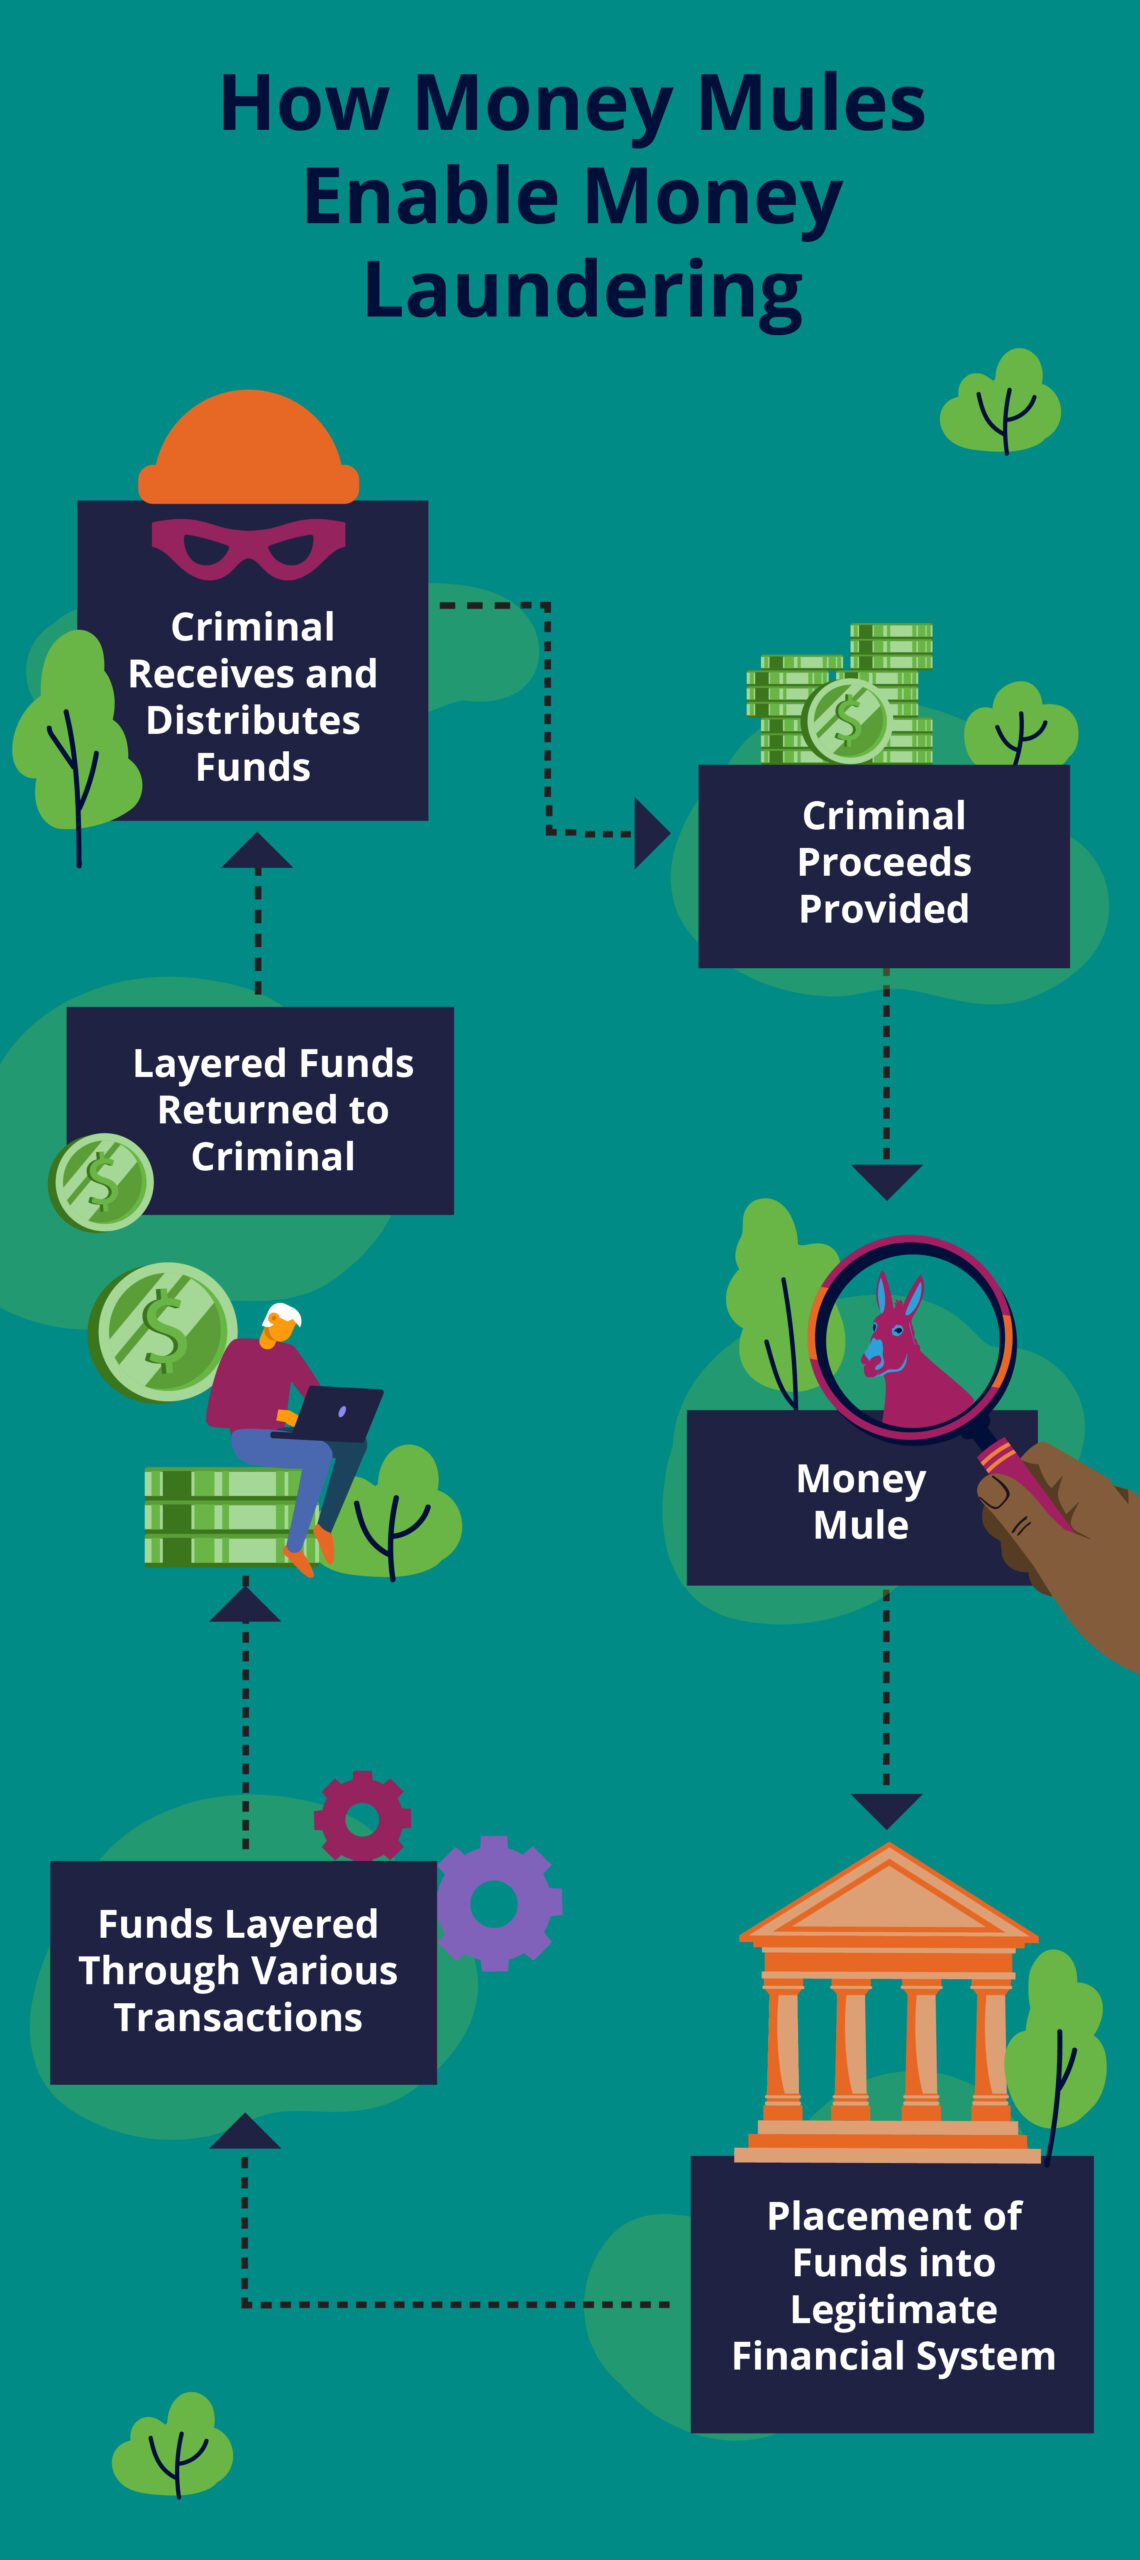 Infographic demonstrating how money mules enable money laundering using transfer fraud by layering money in legitimate financial systems on criminals' behalf